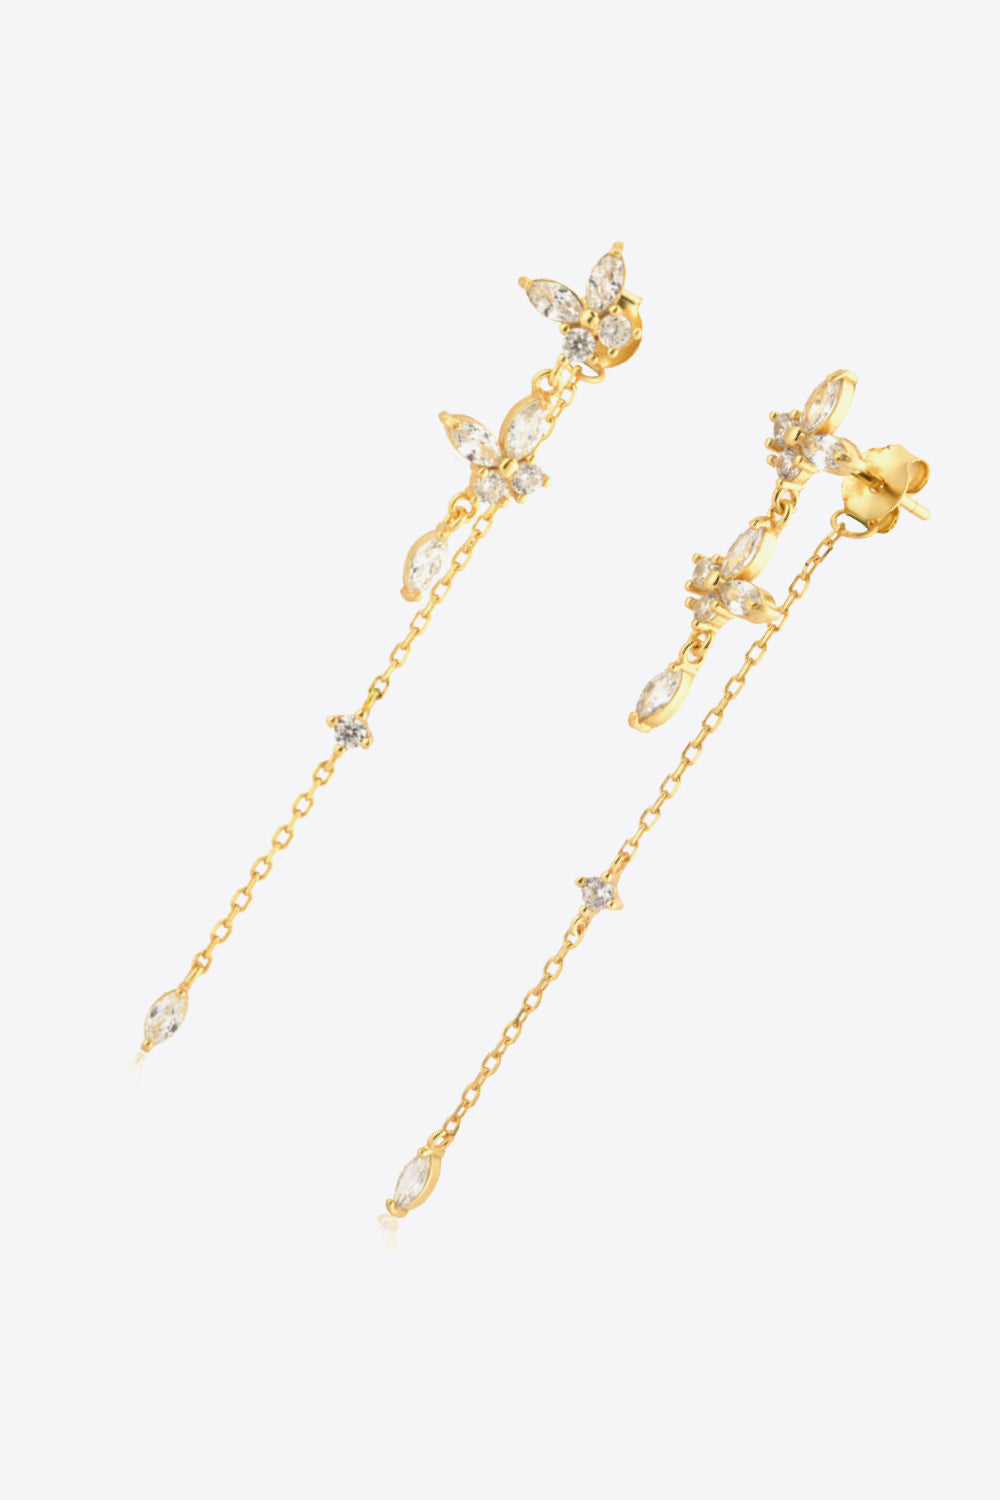 Adorn yourself with our flower earrings, a symbol of blooming beauty and elegance.